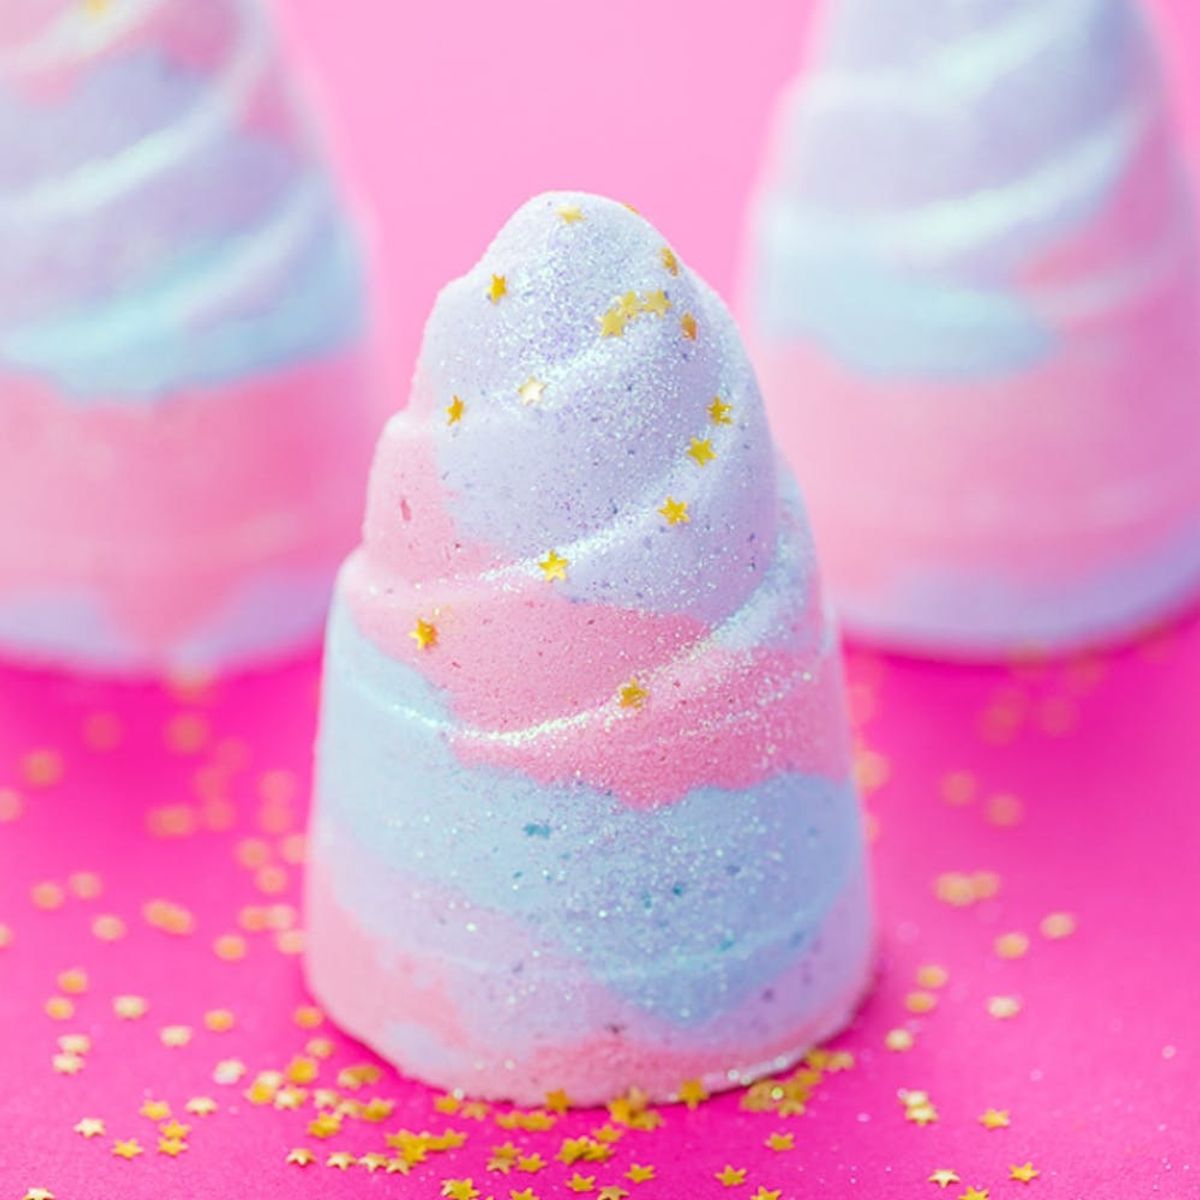 Unicorn Bath Bombs and More Weekend DIY Projects